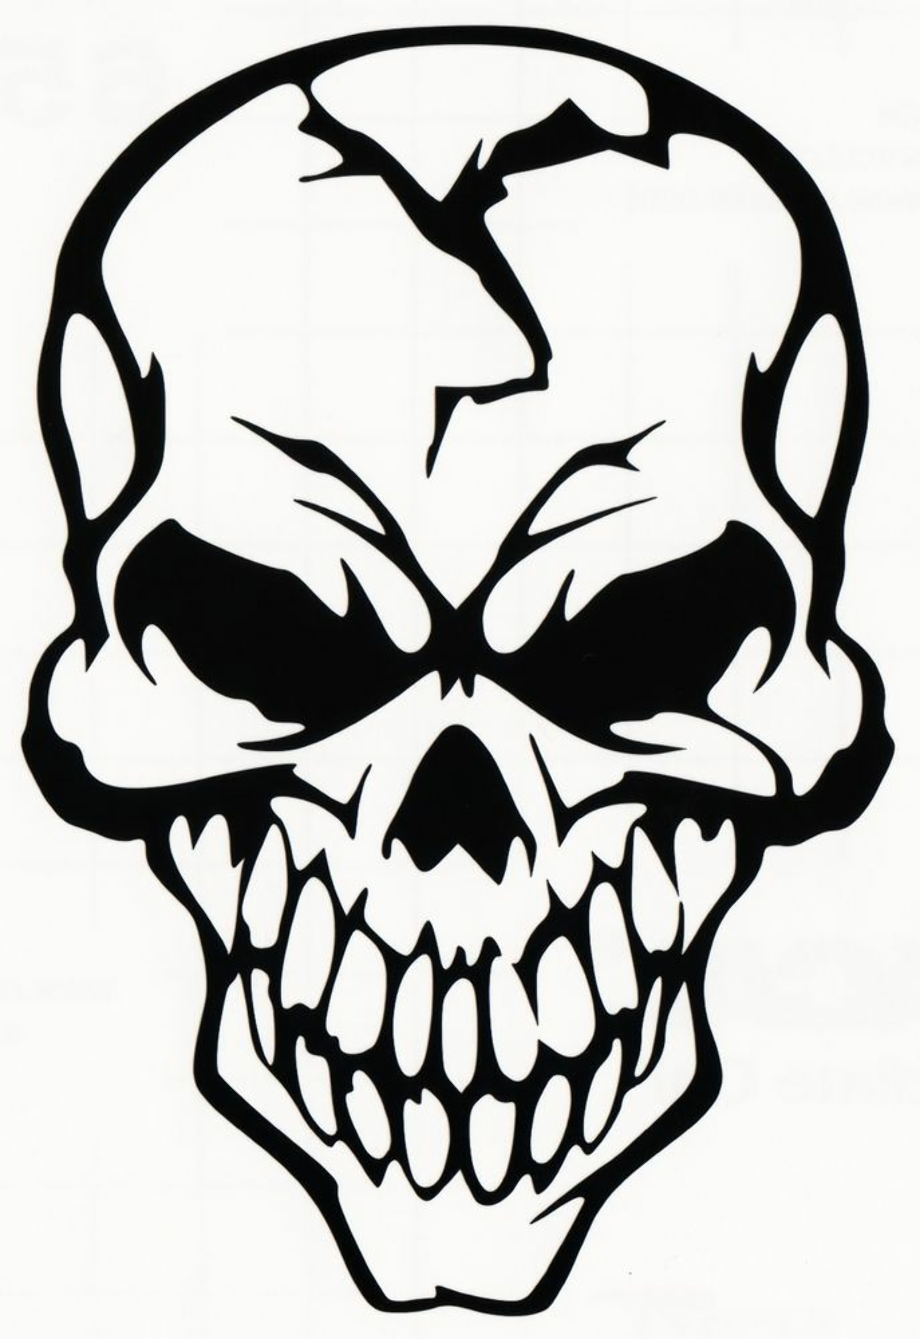 skull clipart collection